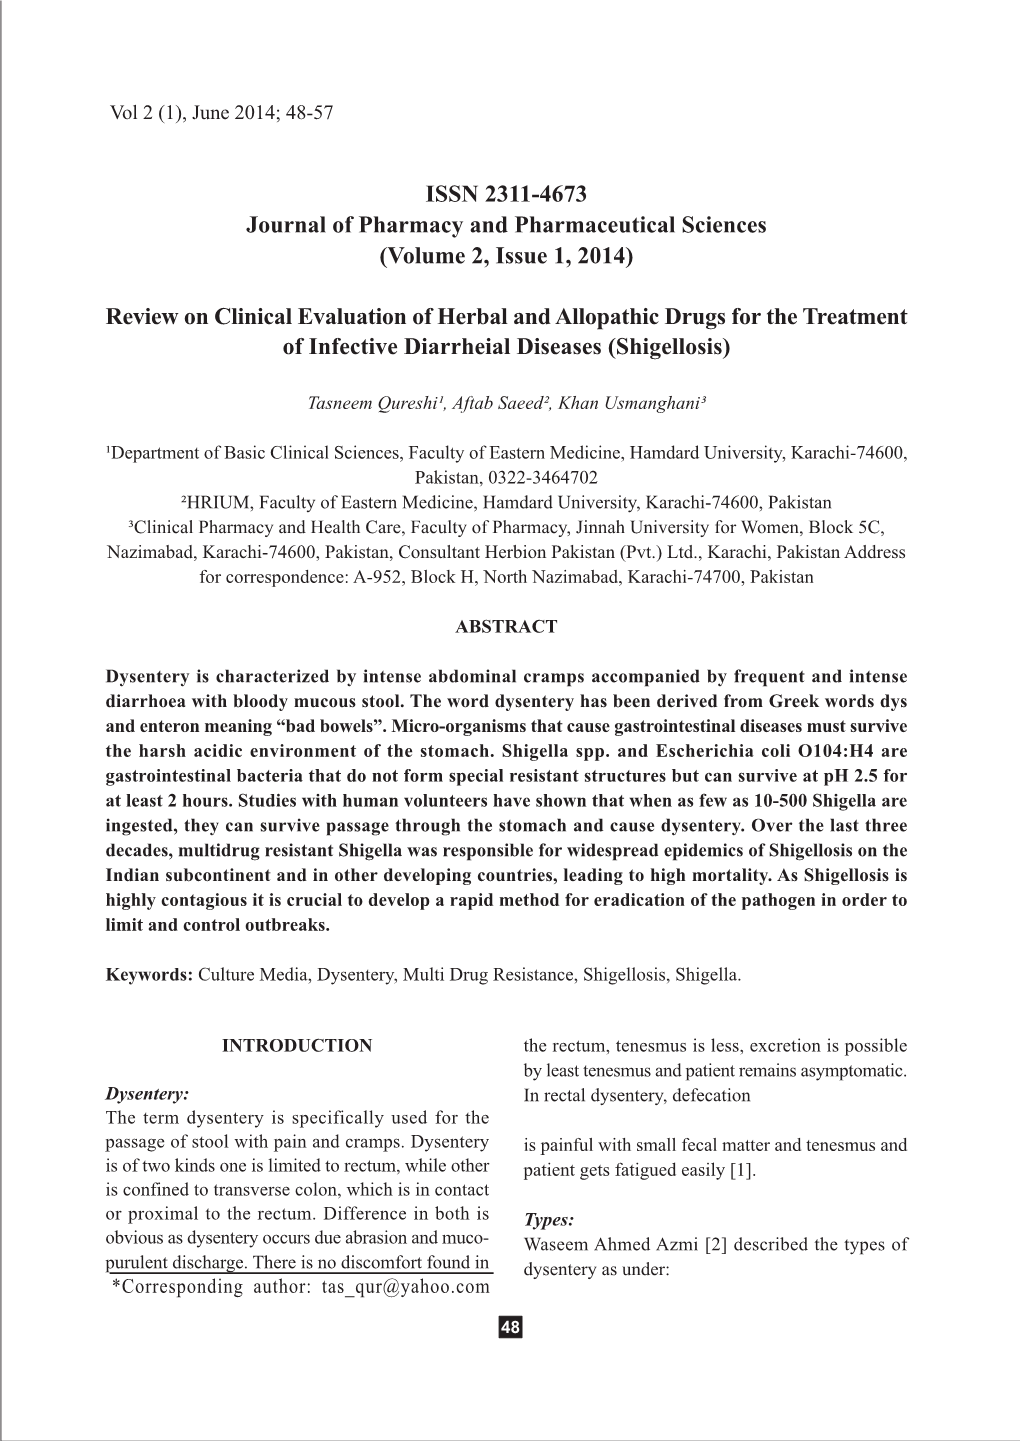 (Volume 2, Issue 1, 2014) Review on Clinical Evaluation of Herbal